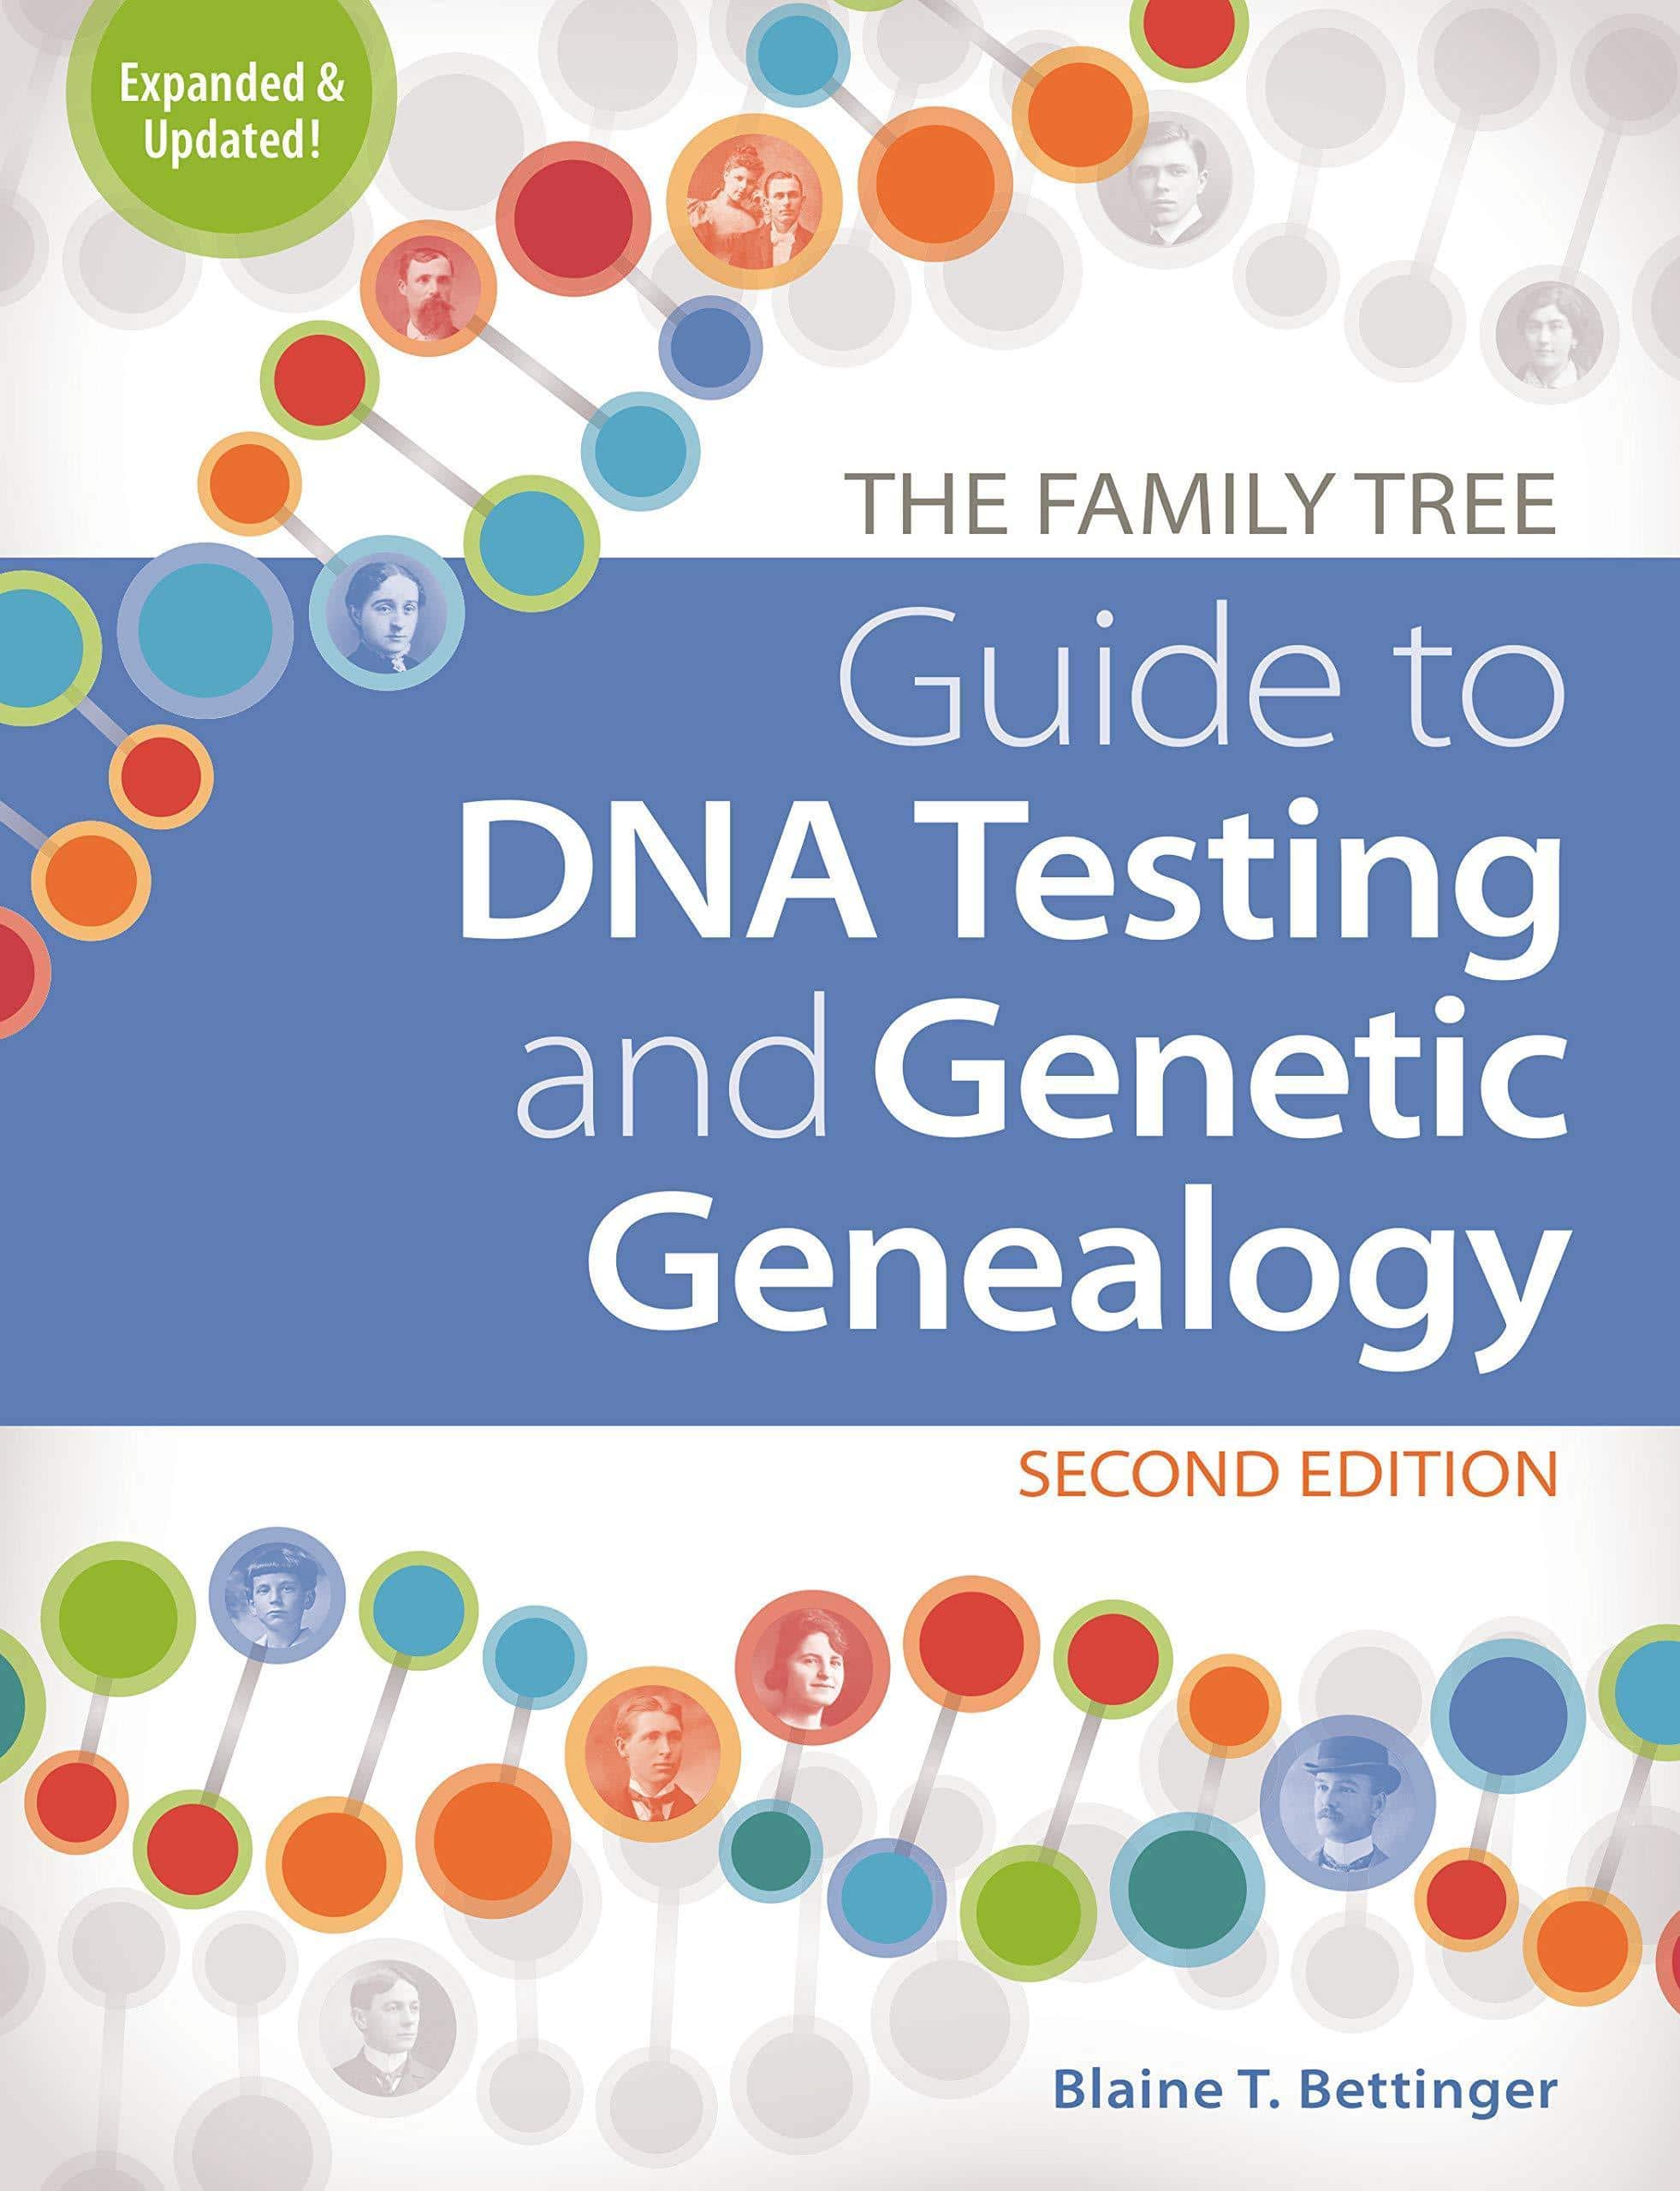 The Family Tree Guide to DNA Testing and Genetic Genealogy - SureShot Books Publishing LLC